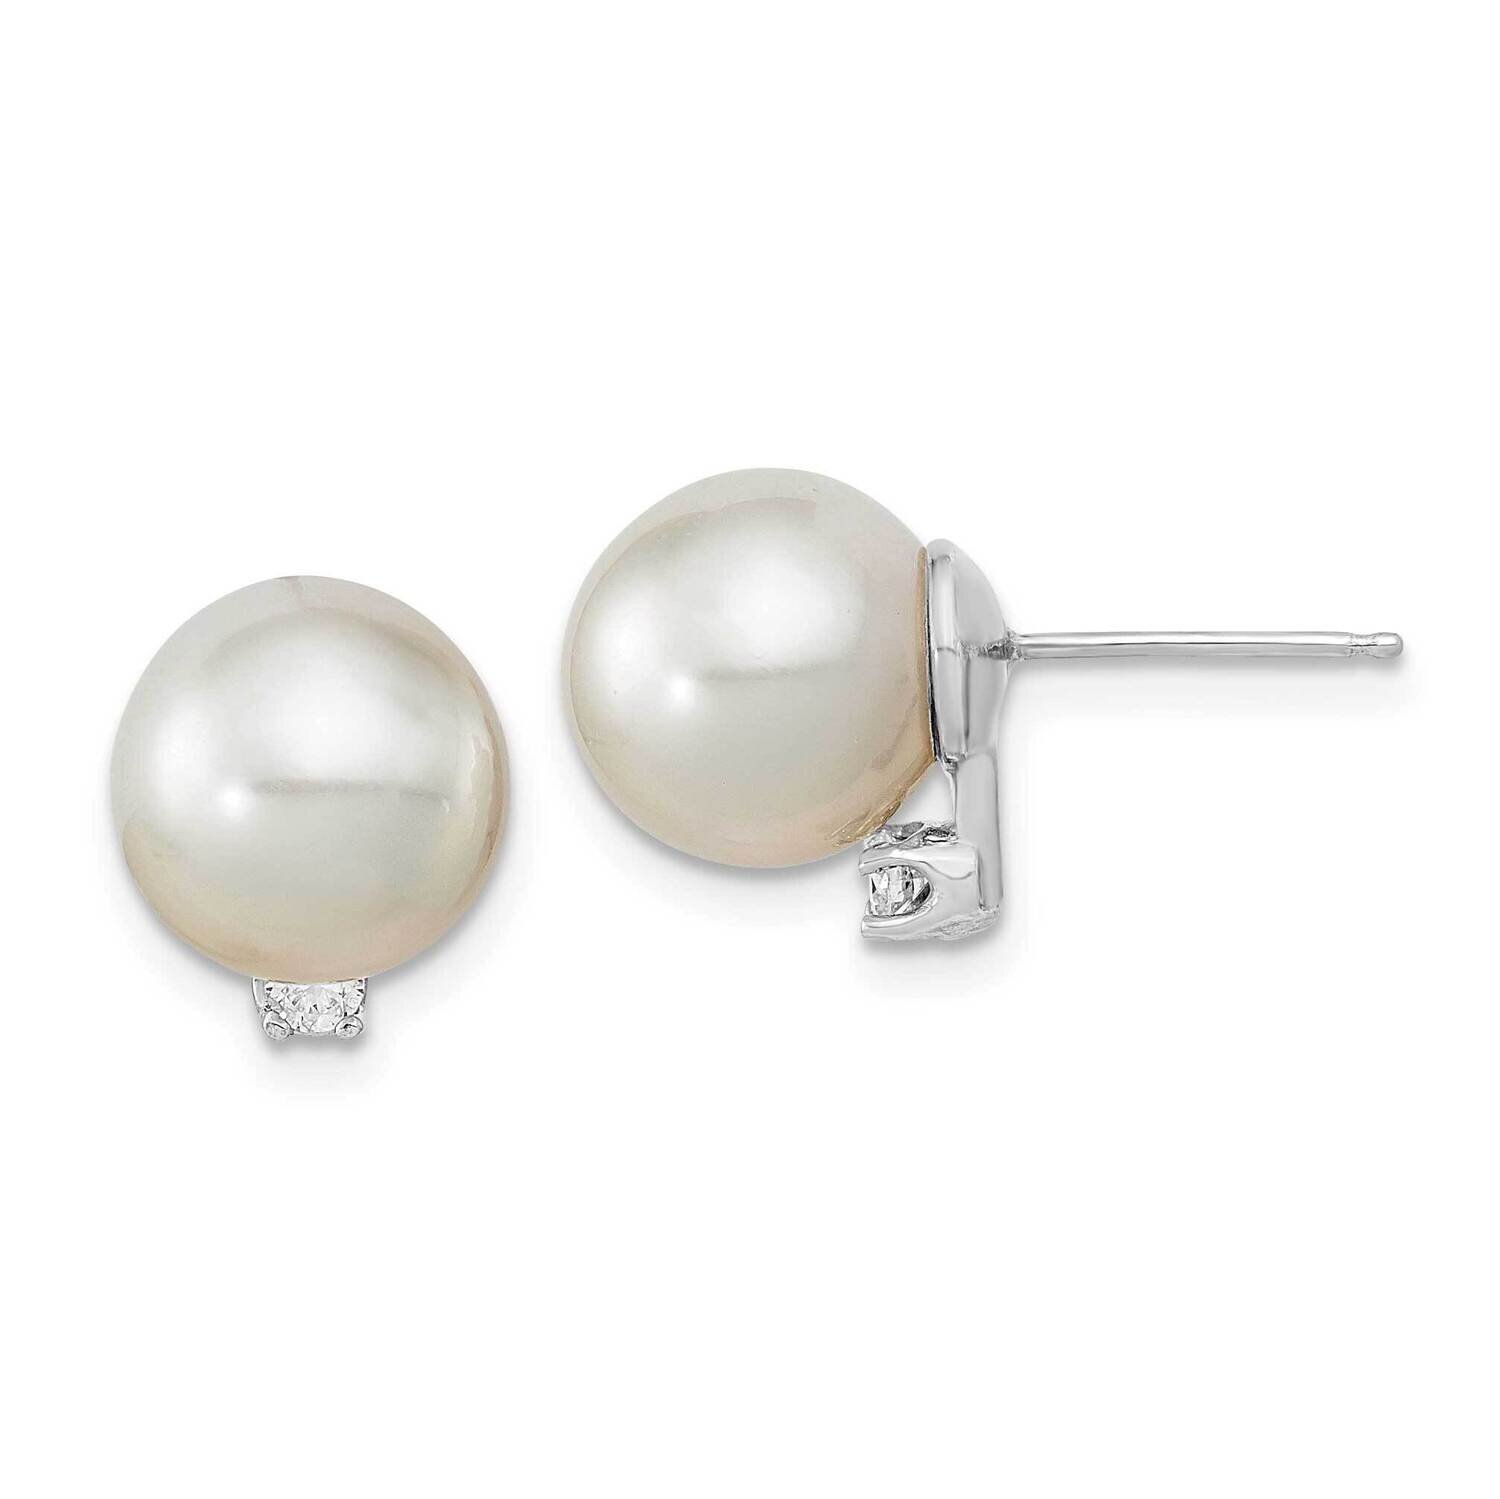 9-10mm Round White Saltwater South Sea Pearl and Diamond Earrings 14k White Gold XF470WE